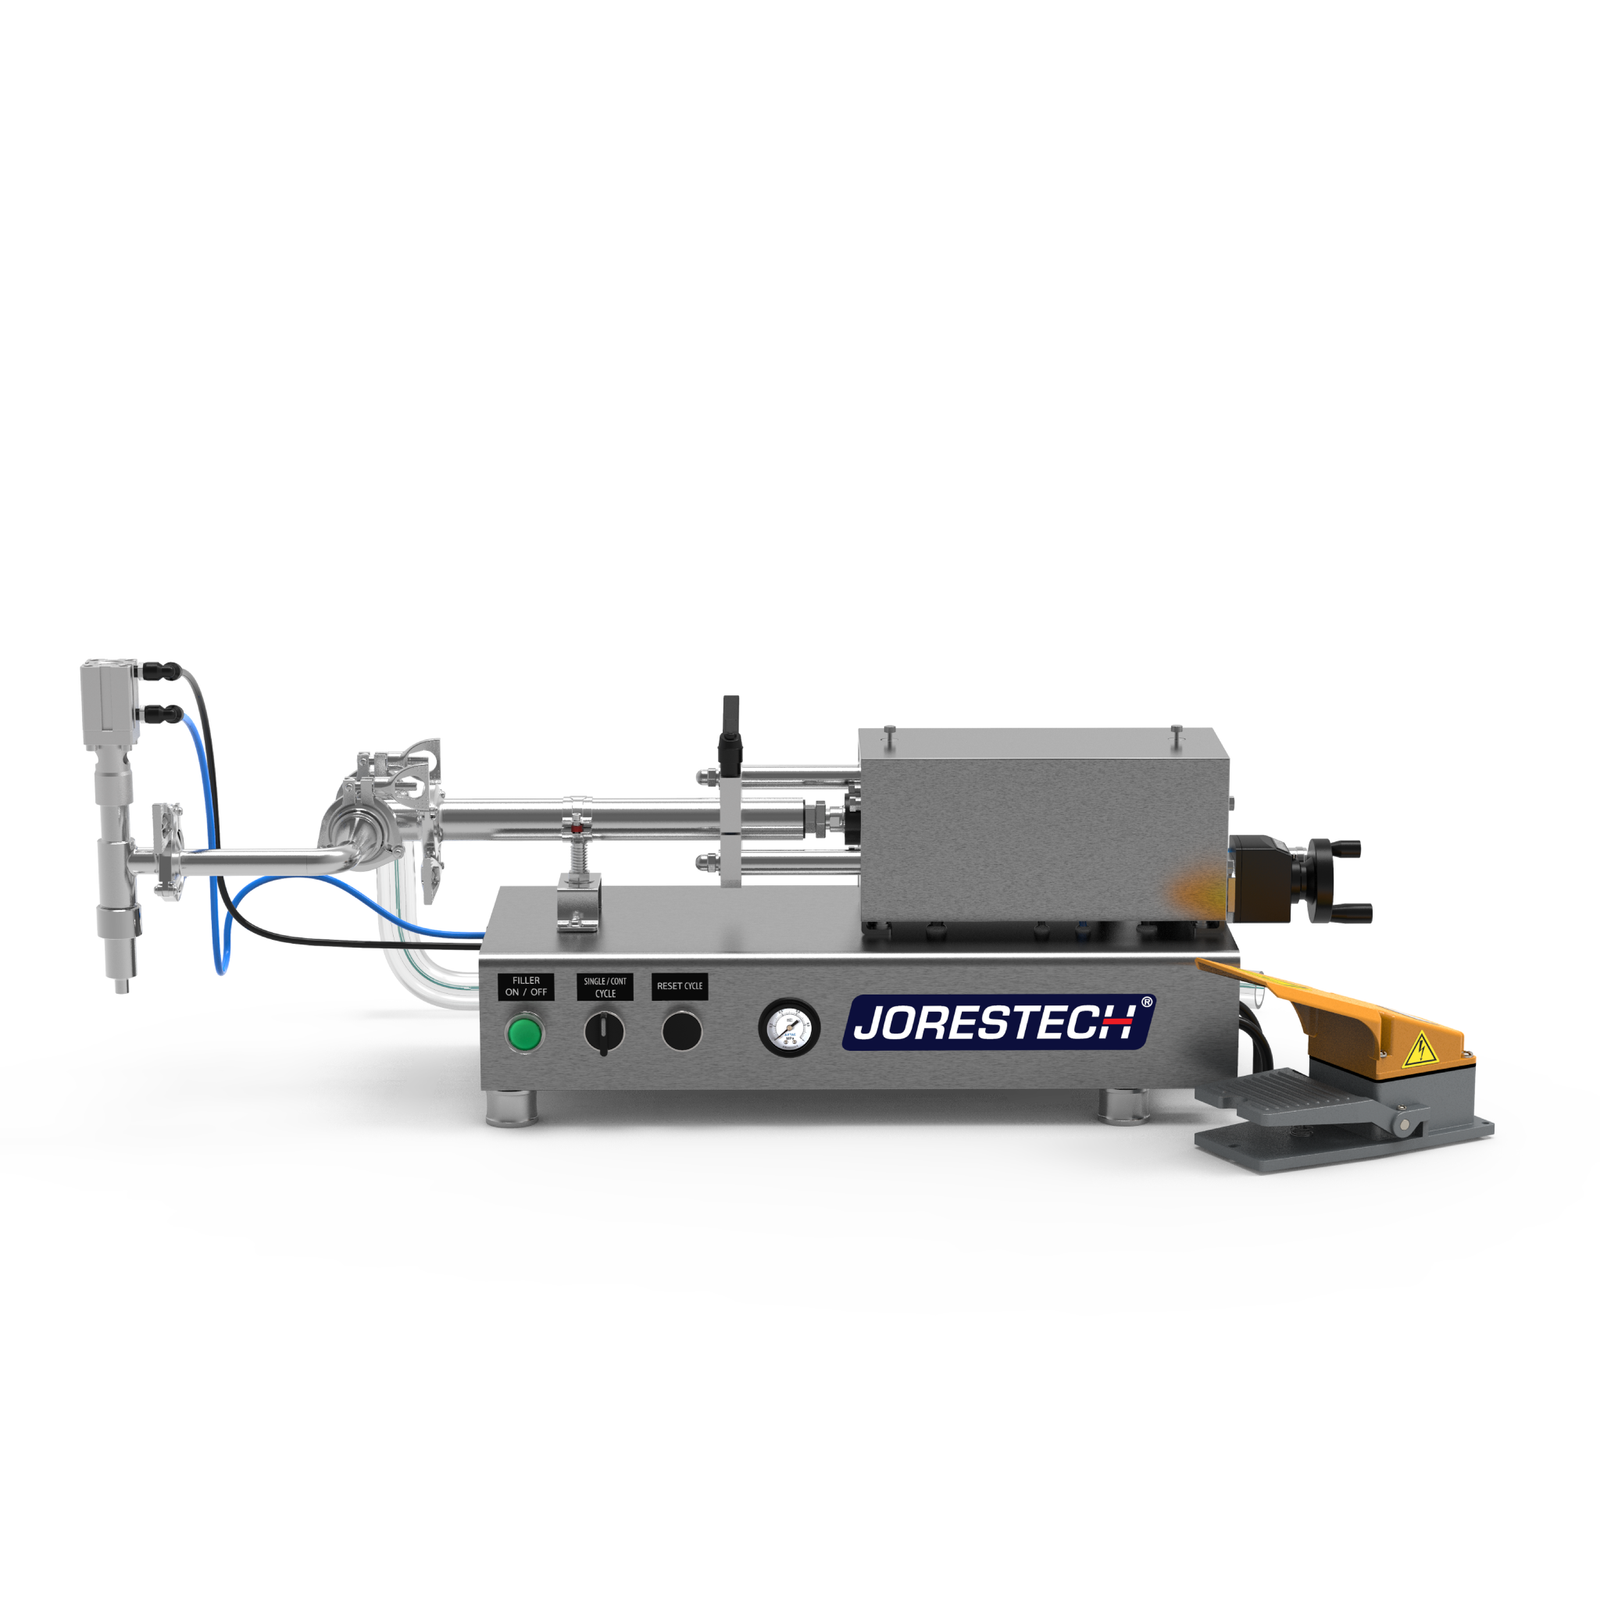 A Low viscosity JORES TECHNOLOGIES® piston filling machine in a frontal view. The piston filler is made out of stainless steel and there's a yellow and grey foot pedal resting on the side.